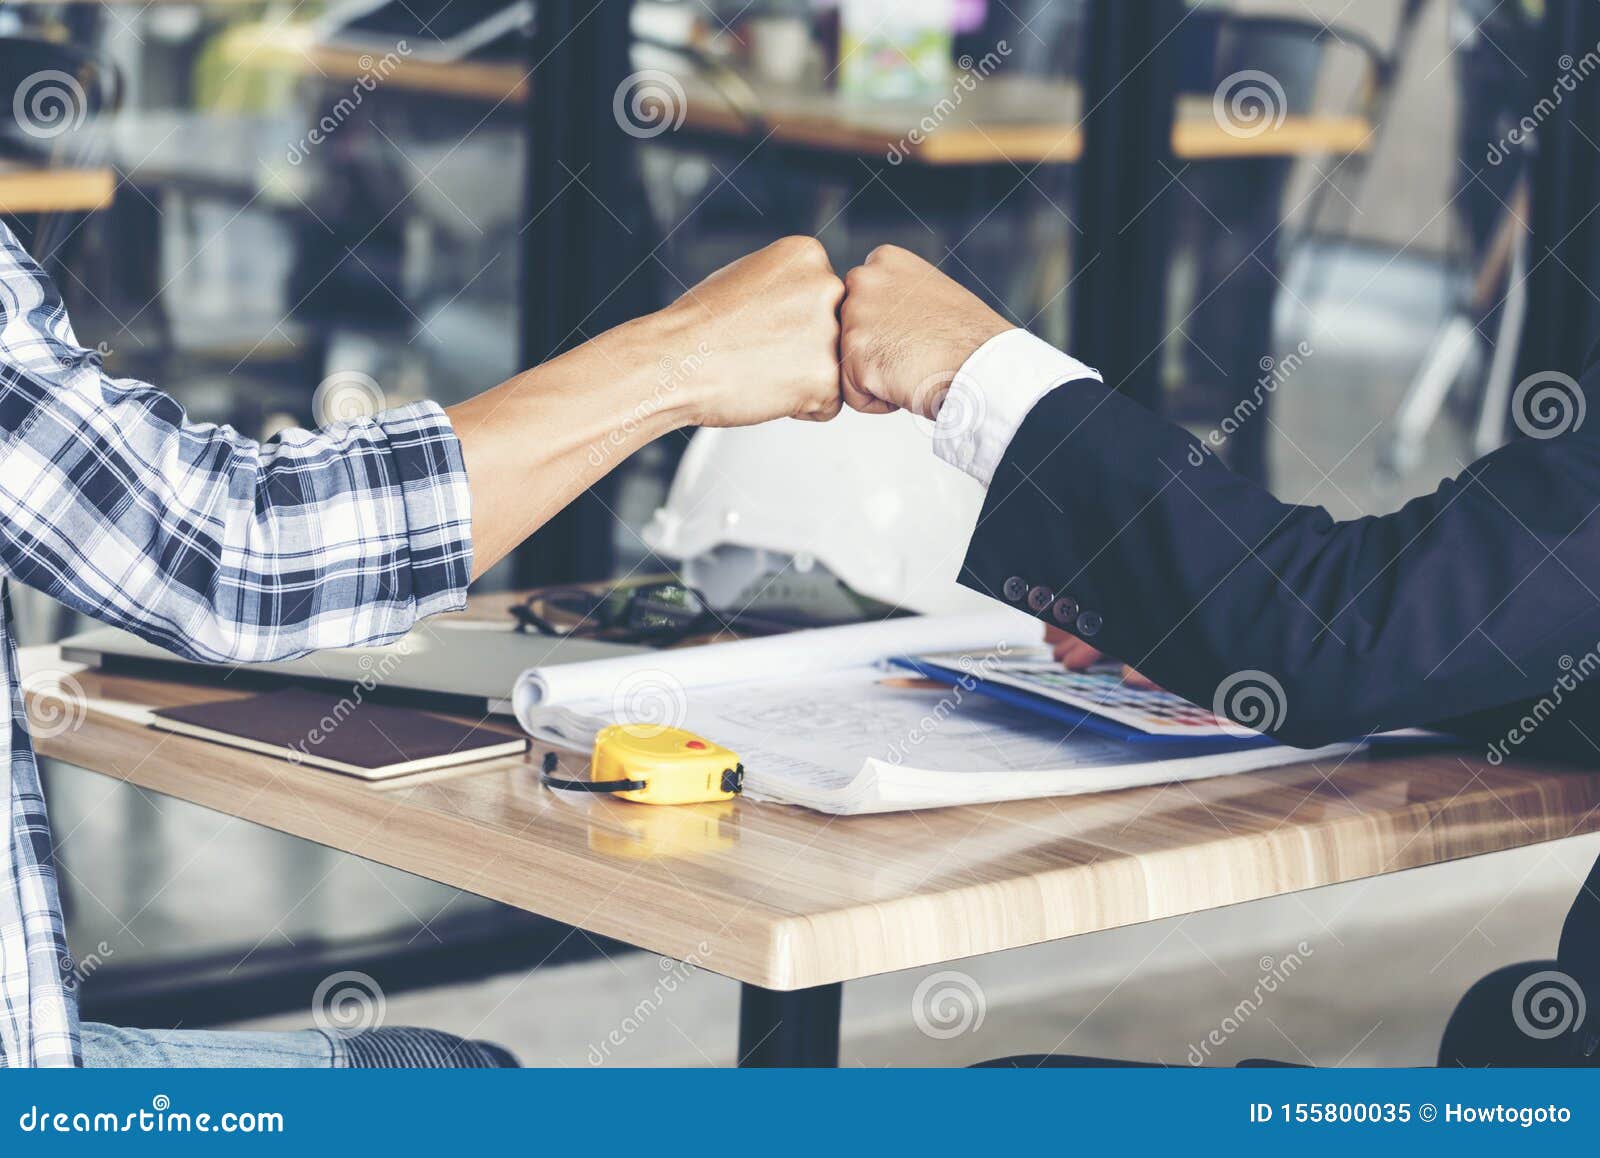 business partners trust in team giving fist bump to greeting start up project contractor.businessman teamwork are partnership in